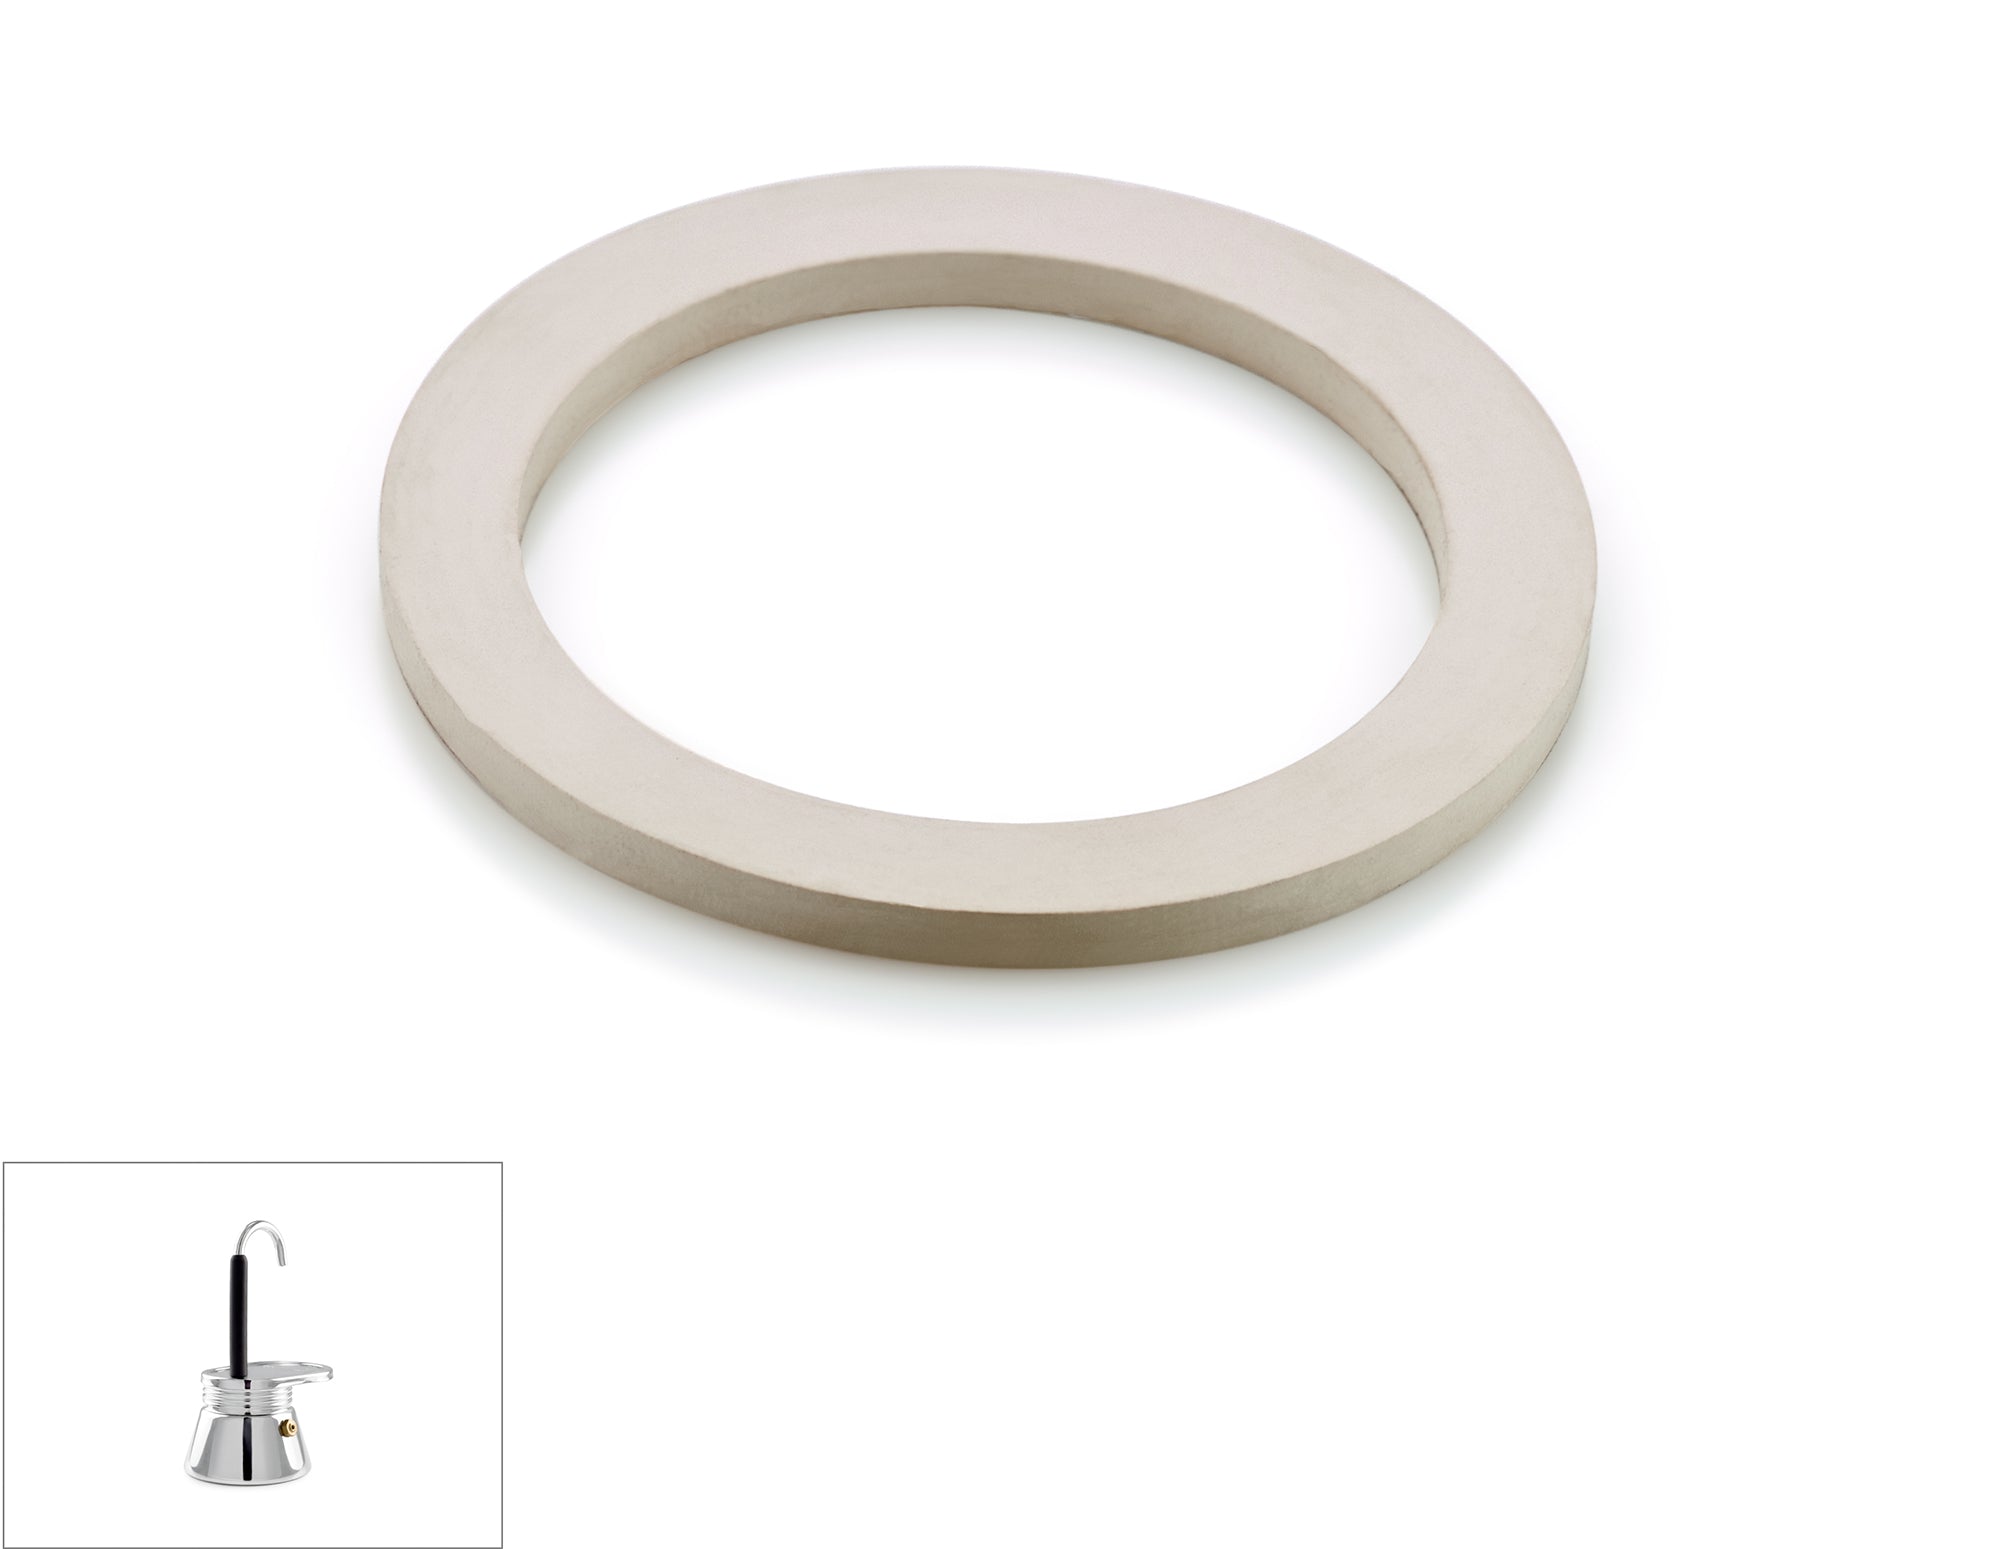 Gasket for 1 cup Glacier Stainless MiniExpresso Maker